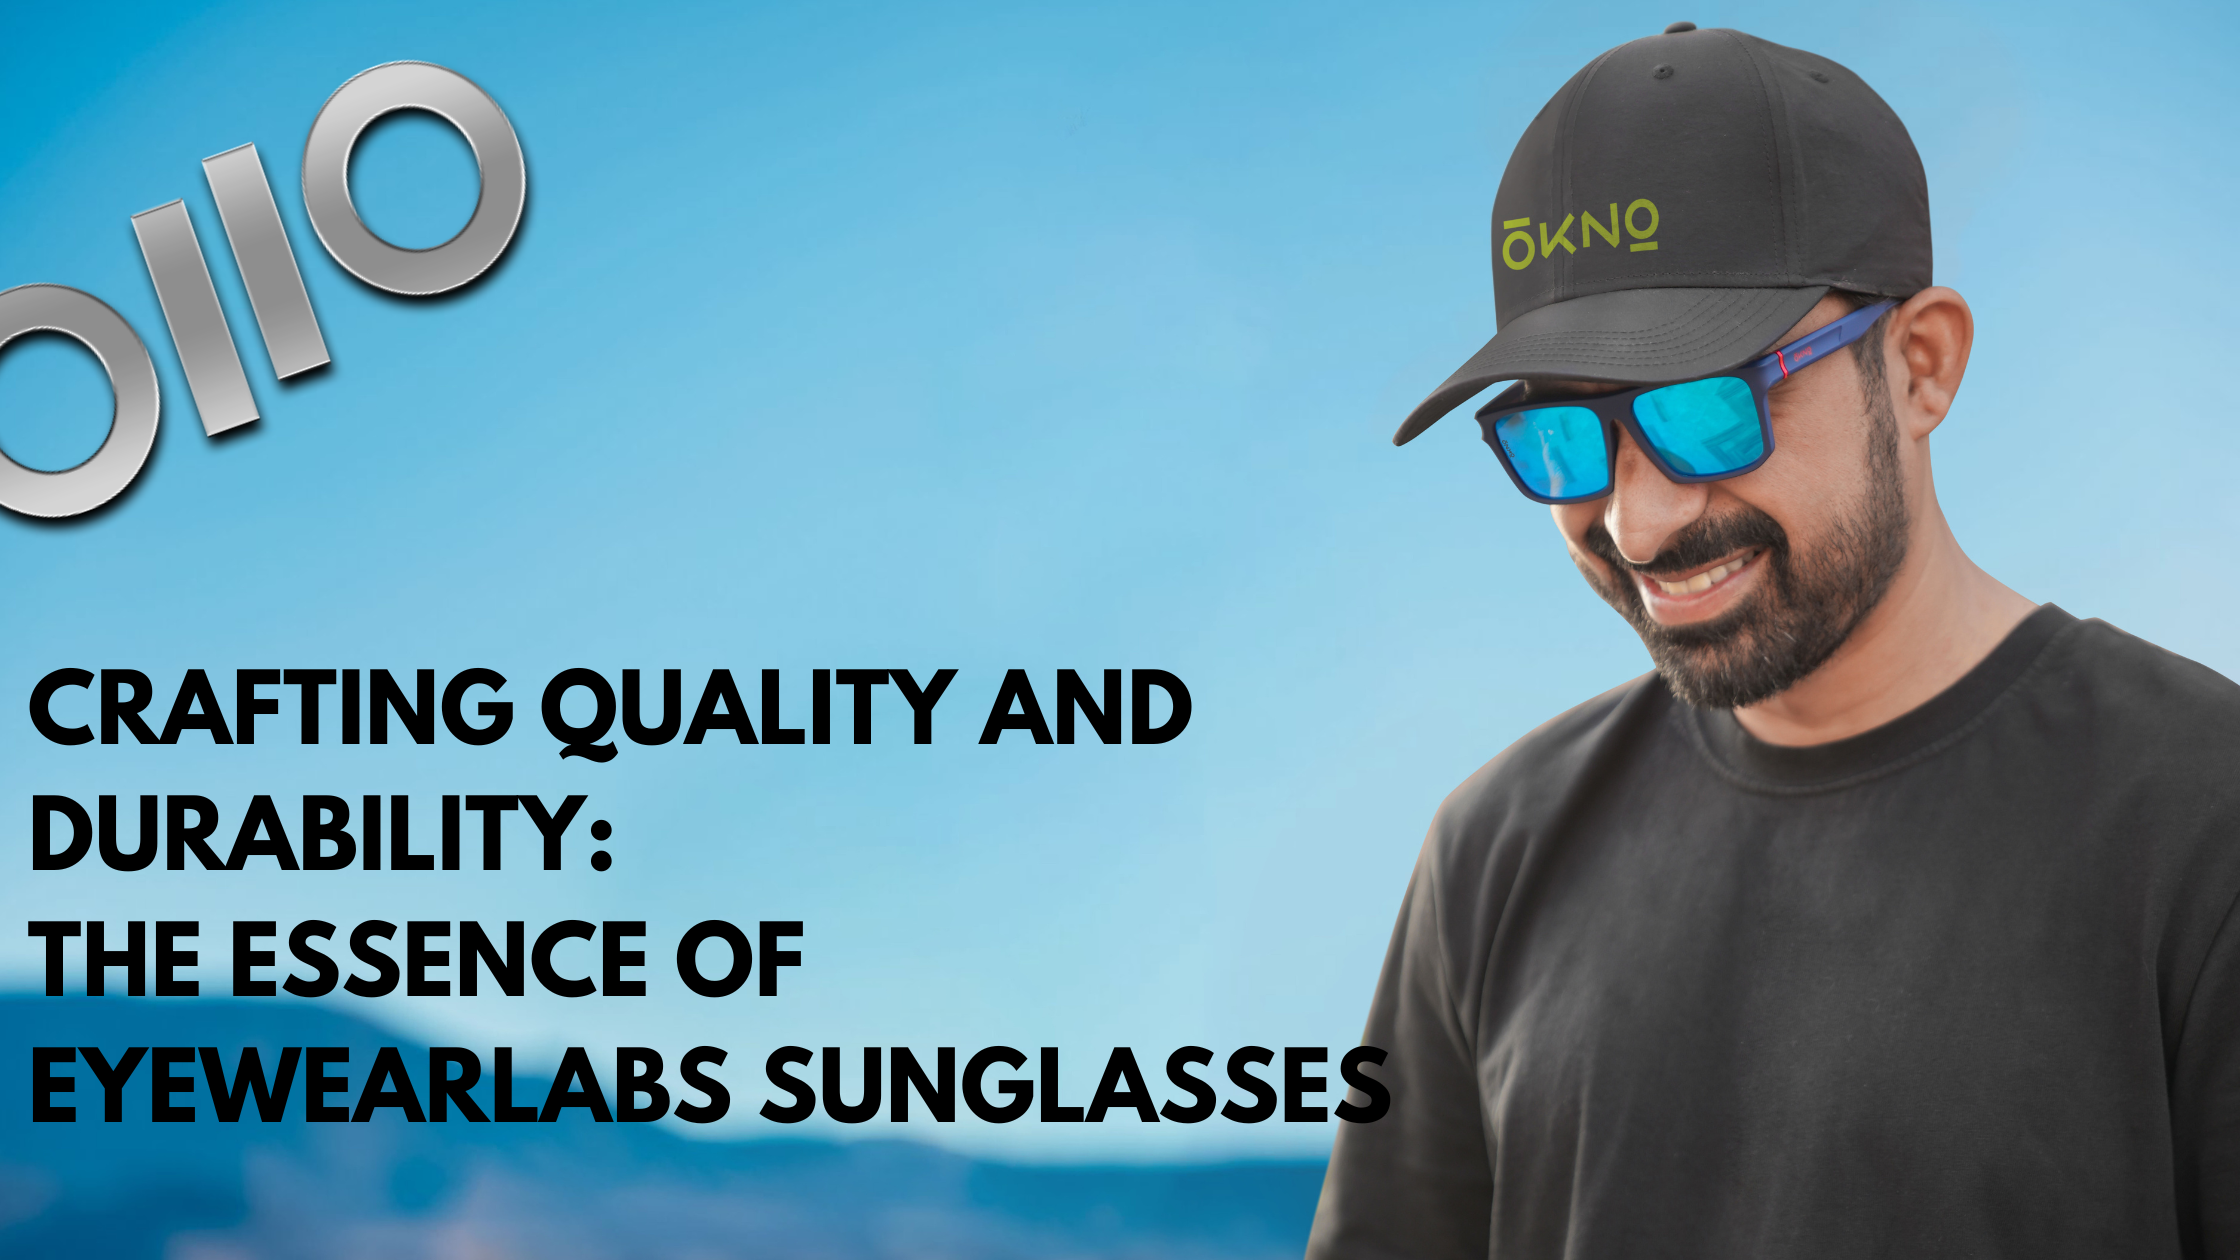 Crafting Quality and Durability: The Essence of Eyewearlabs Sunglasses